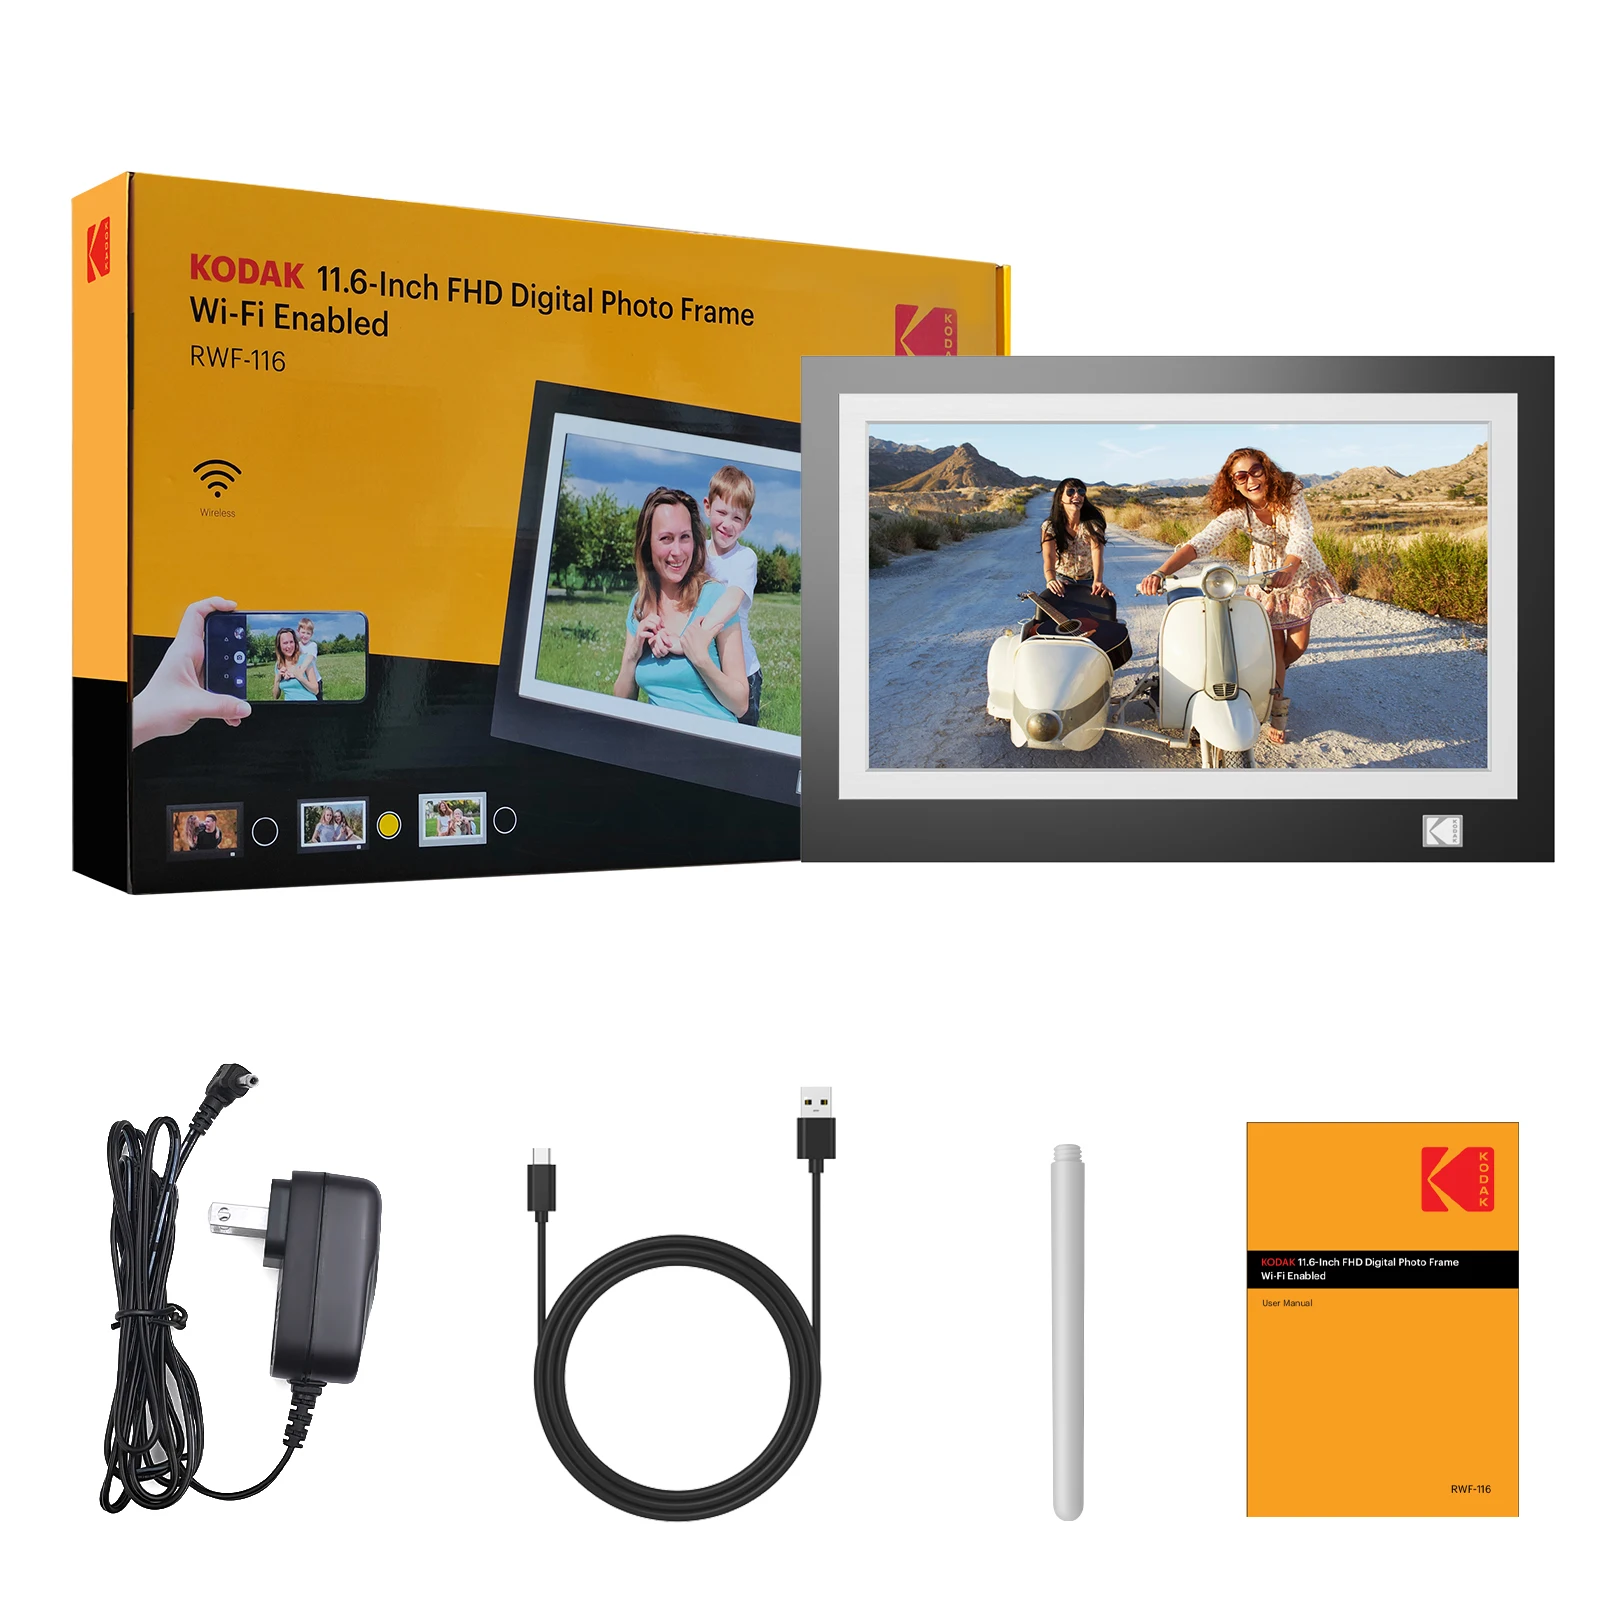 【1 year warranty】Kodak 11.6 Inch WiFi Digital Picture Frame,1920*1080 HD IPS Touch Screen with 32GB Storage,Instant Share Photo images - 6